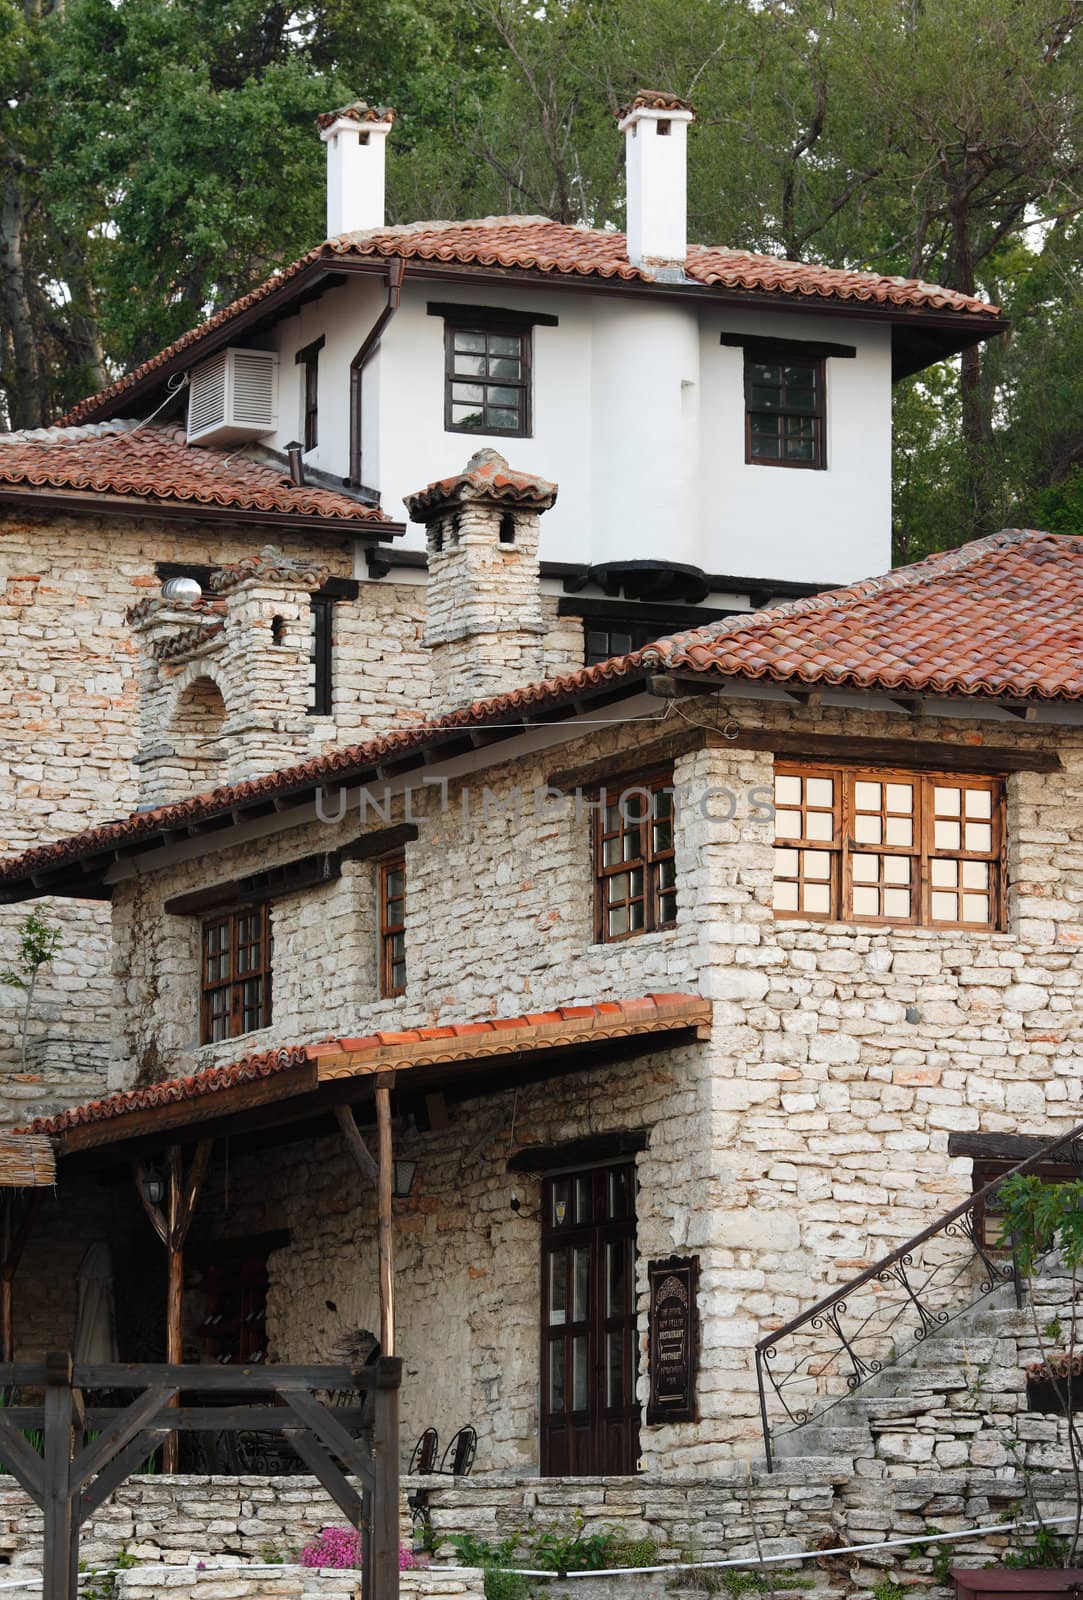 Ancient architecture houses in Balchik